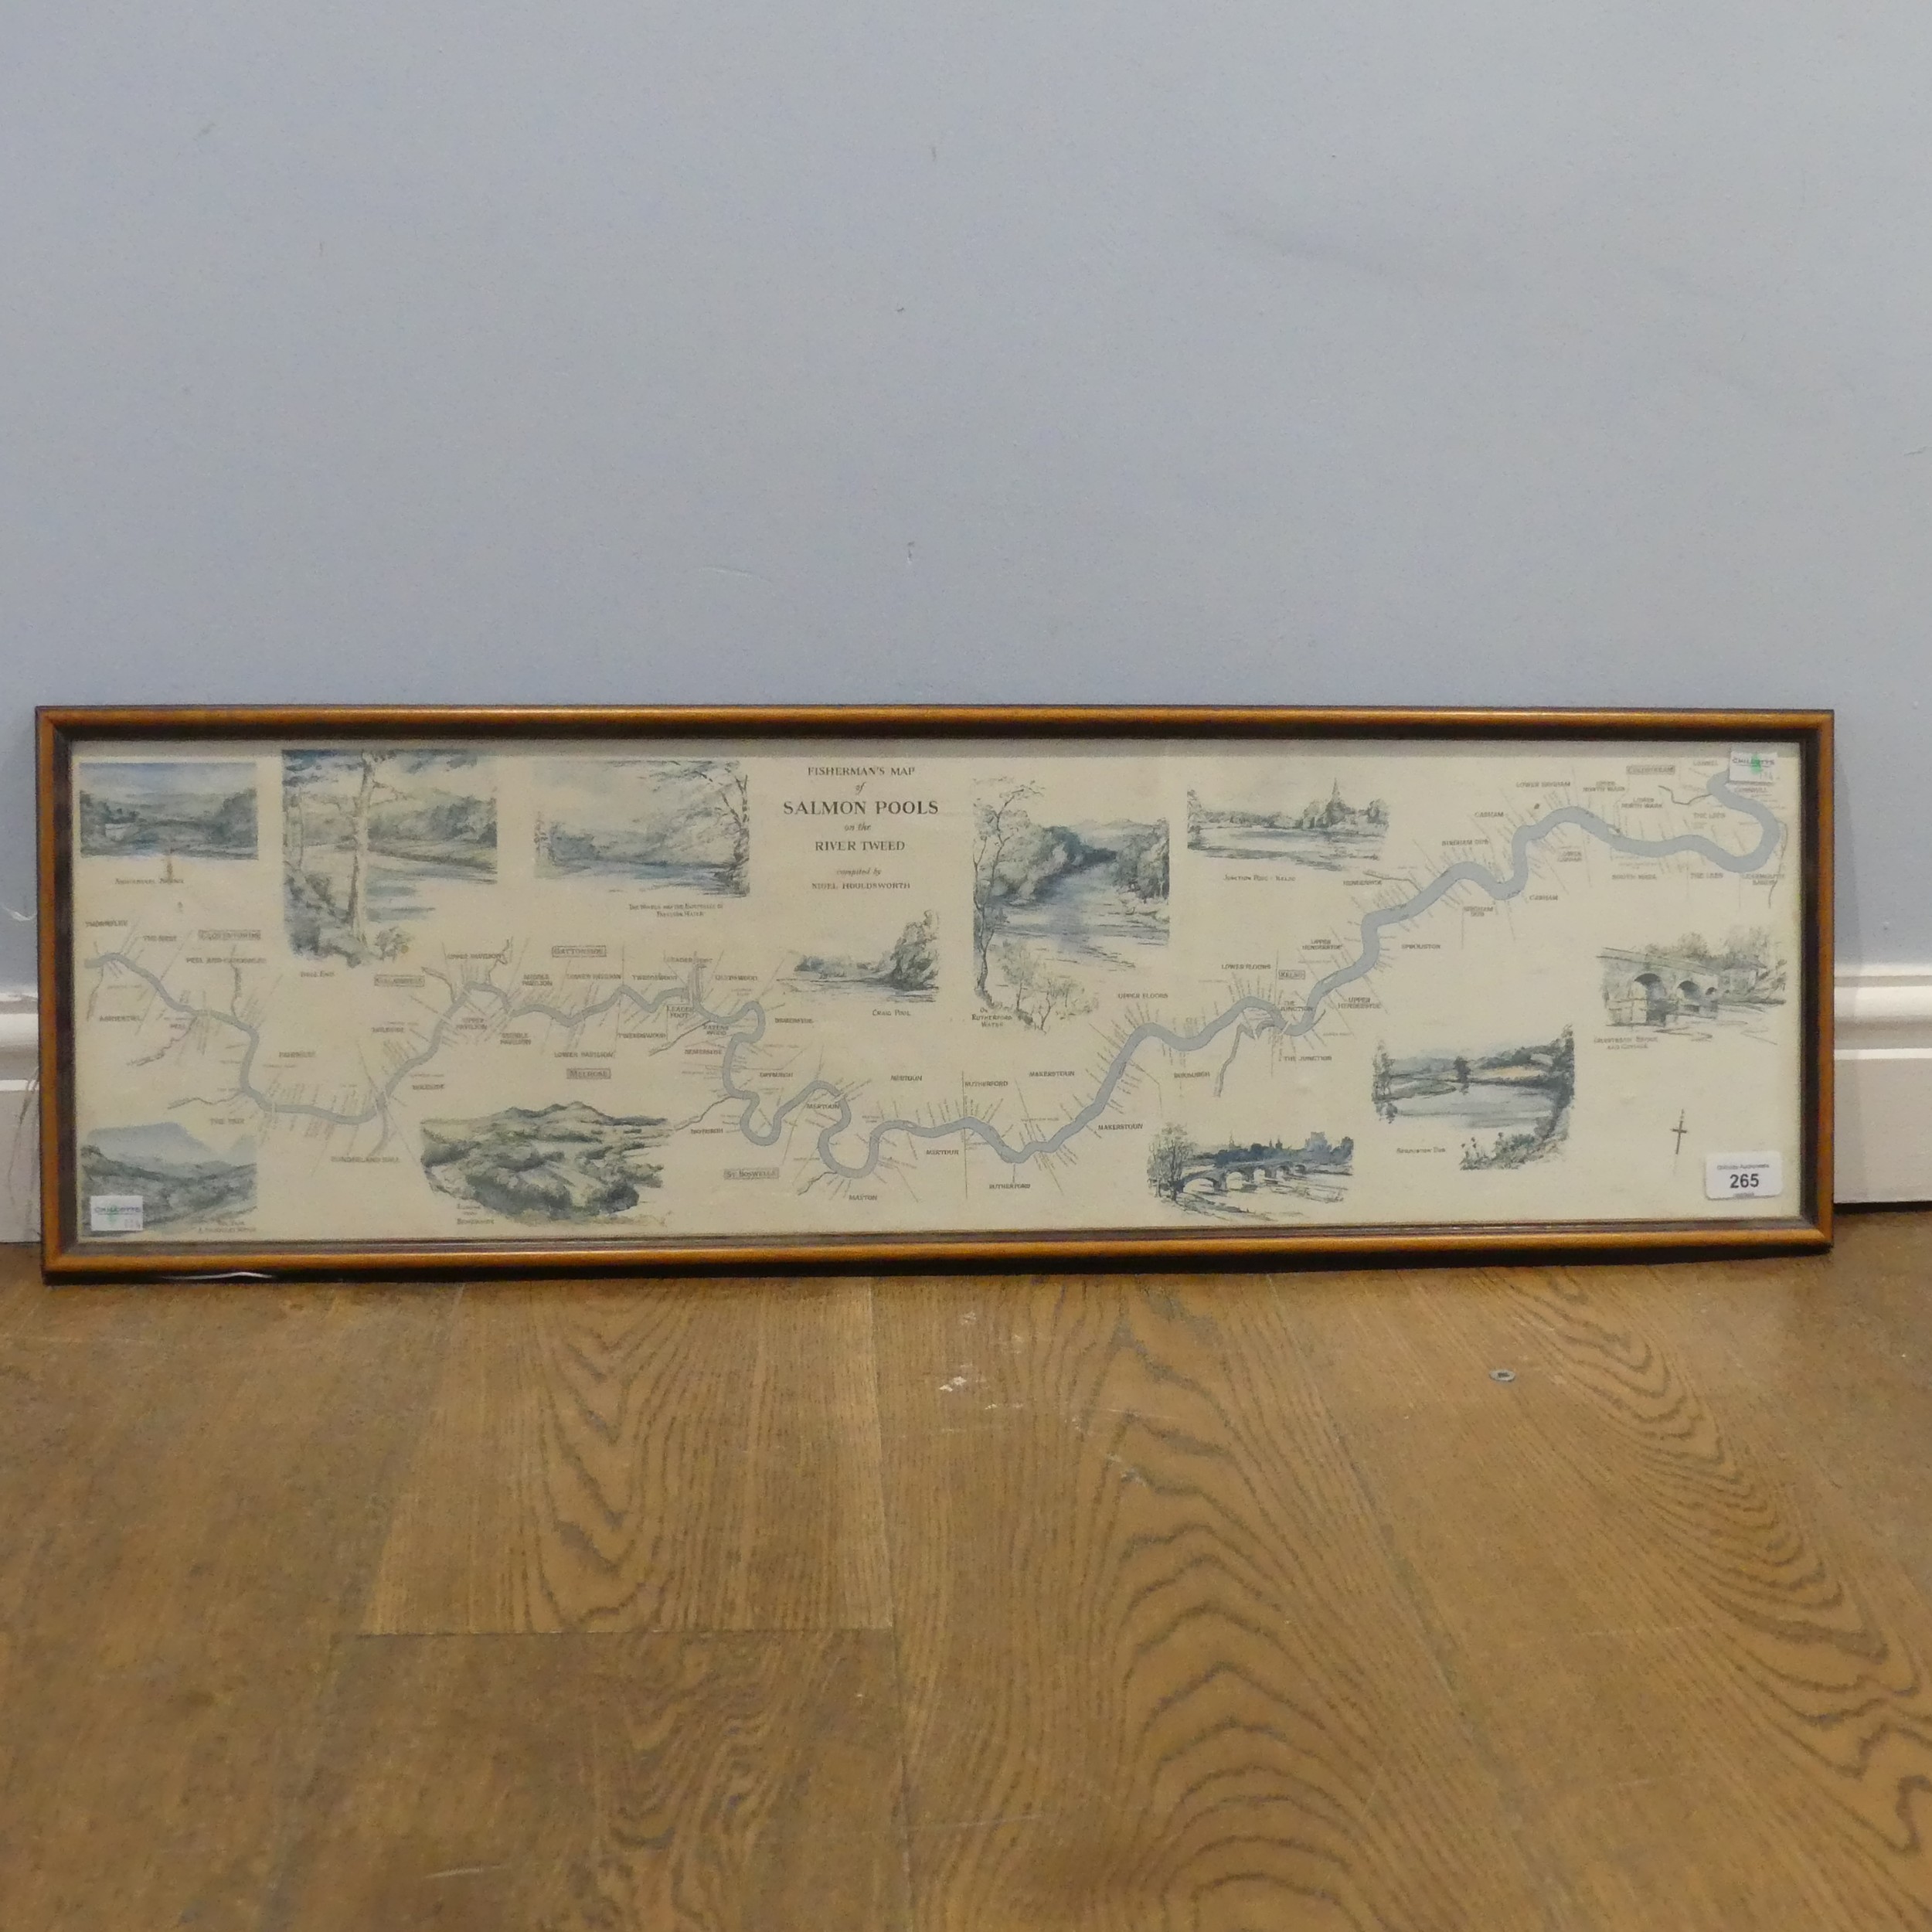 A contemporary Nigel Houldsworth "Fisherman's Map of Salmon Pools on the River Tweed'', together